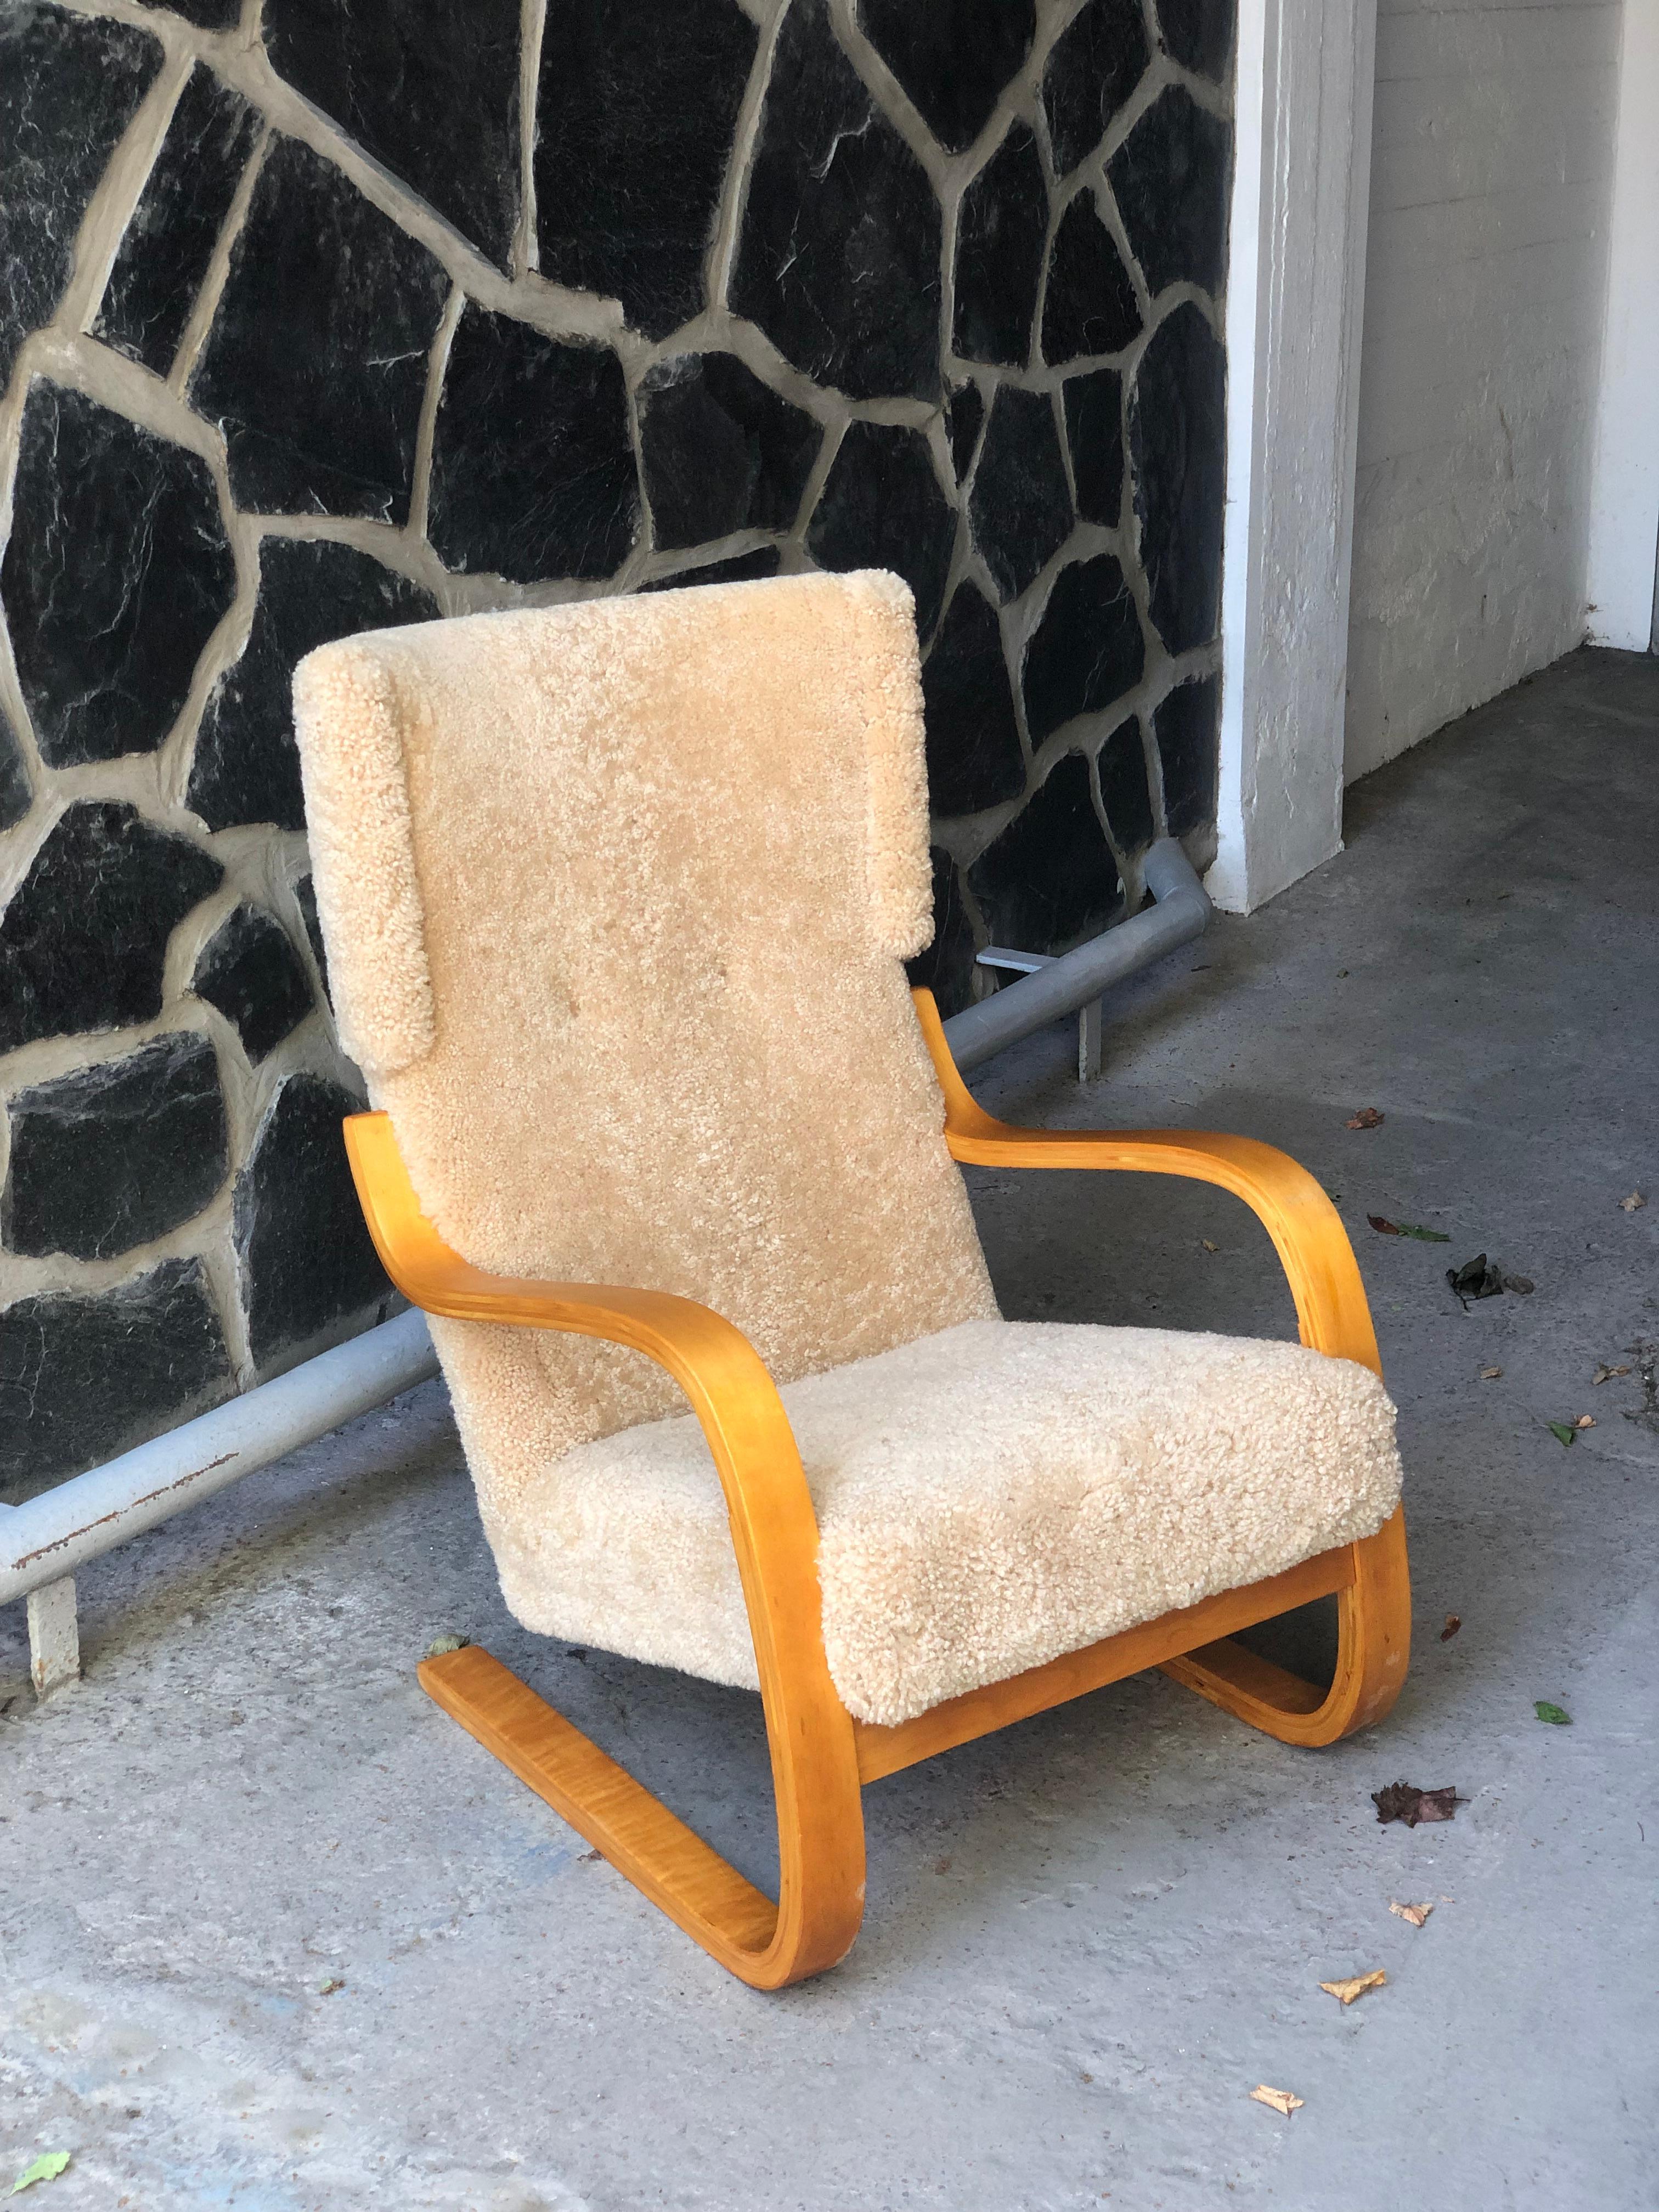 A beautiful original Alvar Aalto armchair model 401, which was first designed in 1933. The 401 chair was part of the iconic Paimio Sanatorium that basically launched the Aalto name to Architect stardom. The chair itself is light and has the Aalto